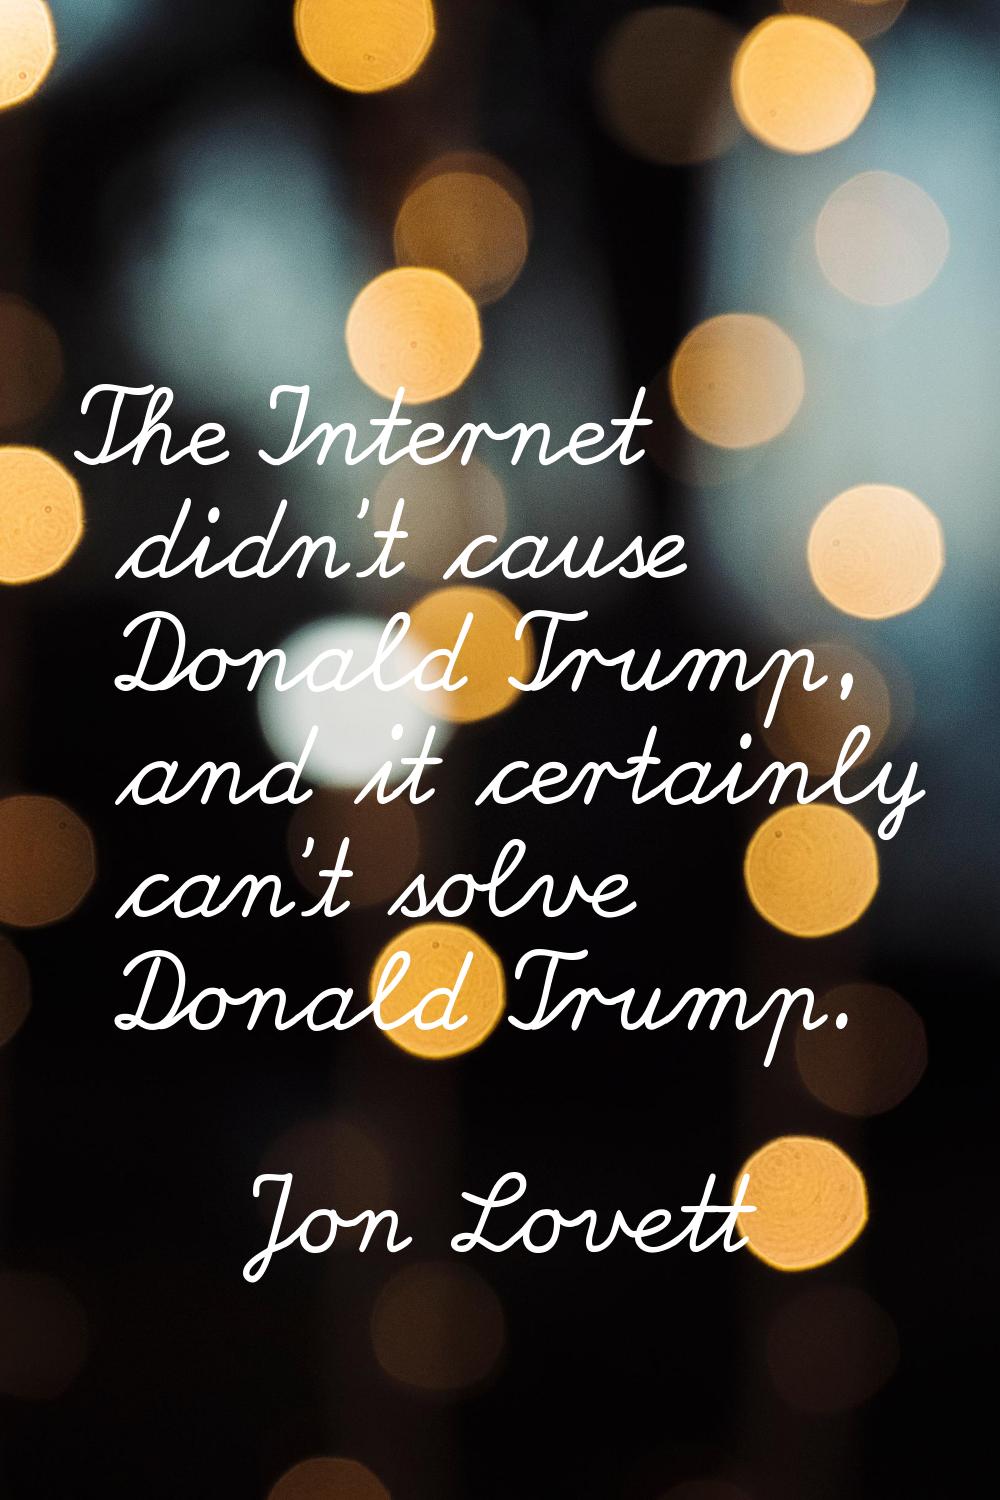 The Internet didn't cause Donald Trump, and it certainly can't solve Donald Trump.